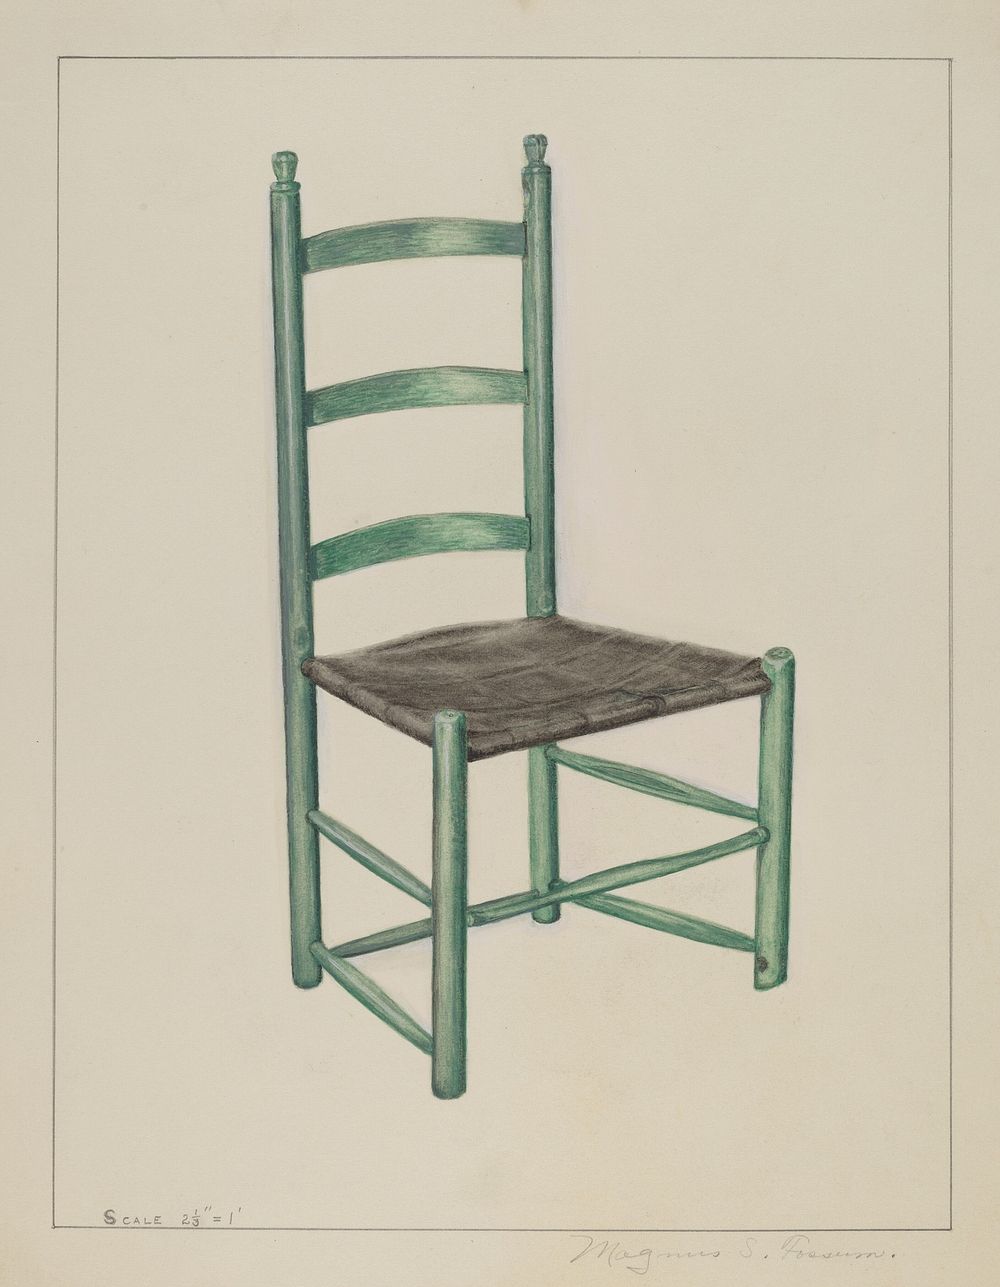 "Ladder Back" Chair - Called "Jolting Chair" (c. 1936) by Magnus S. Fossum.